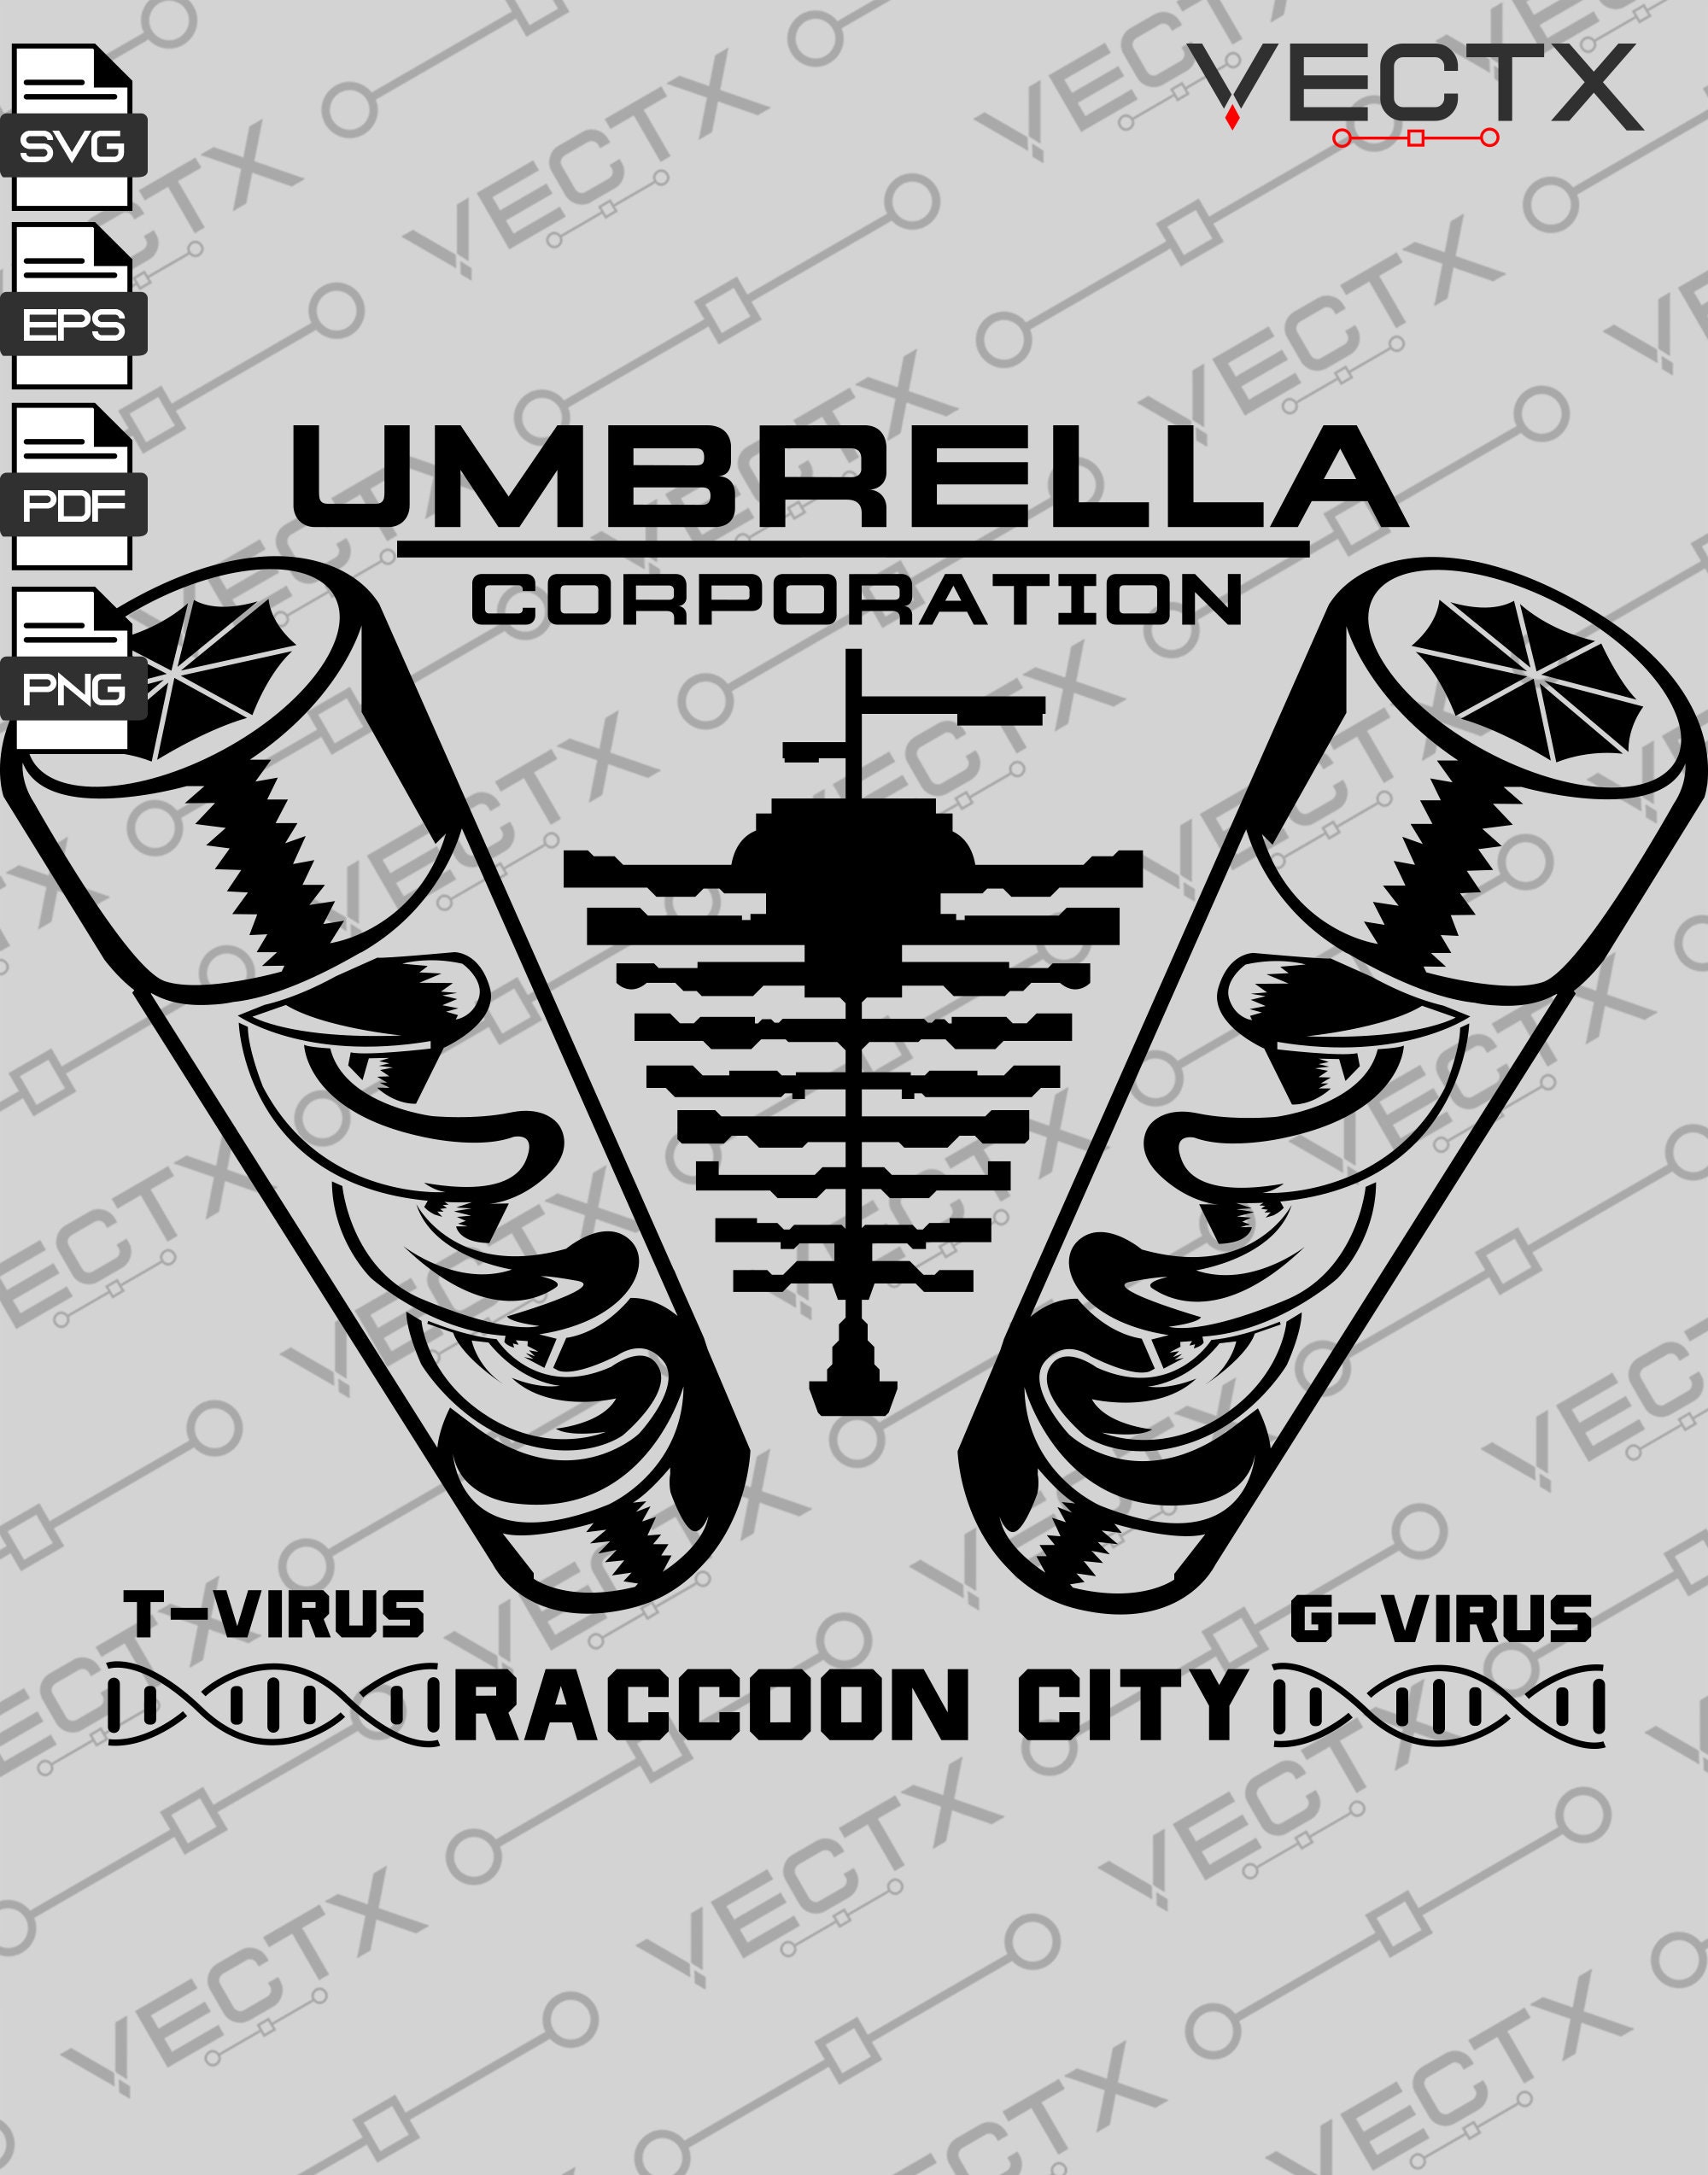 Umbrella Corporation Logo for Cutting - SVG, PNG, and JPEG